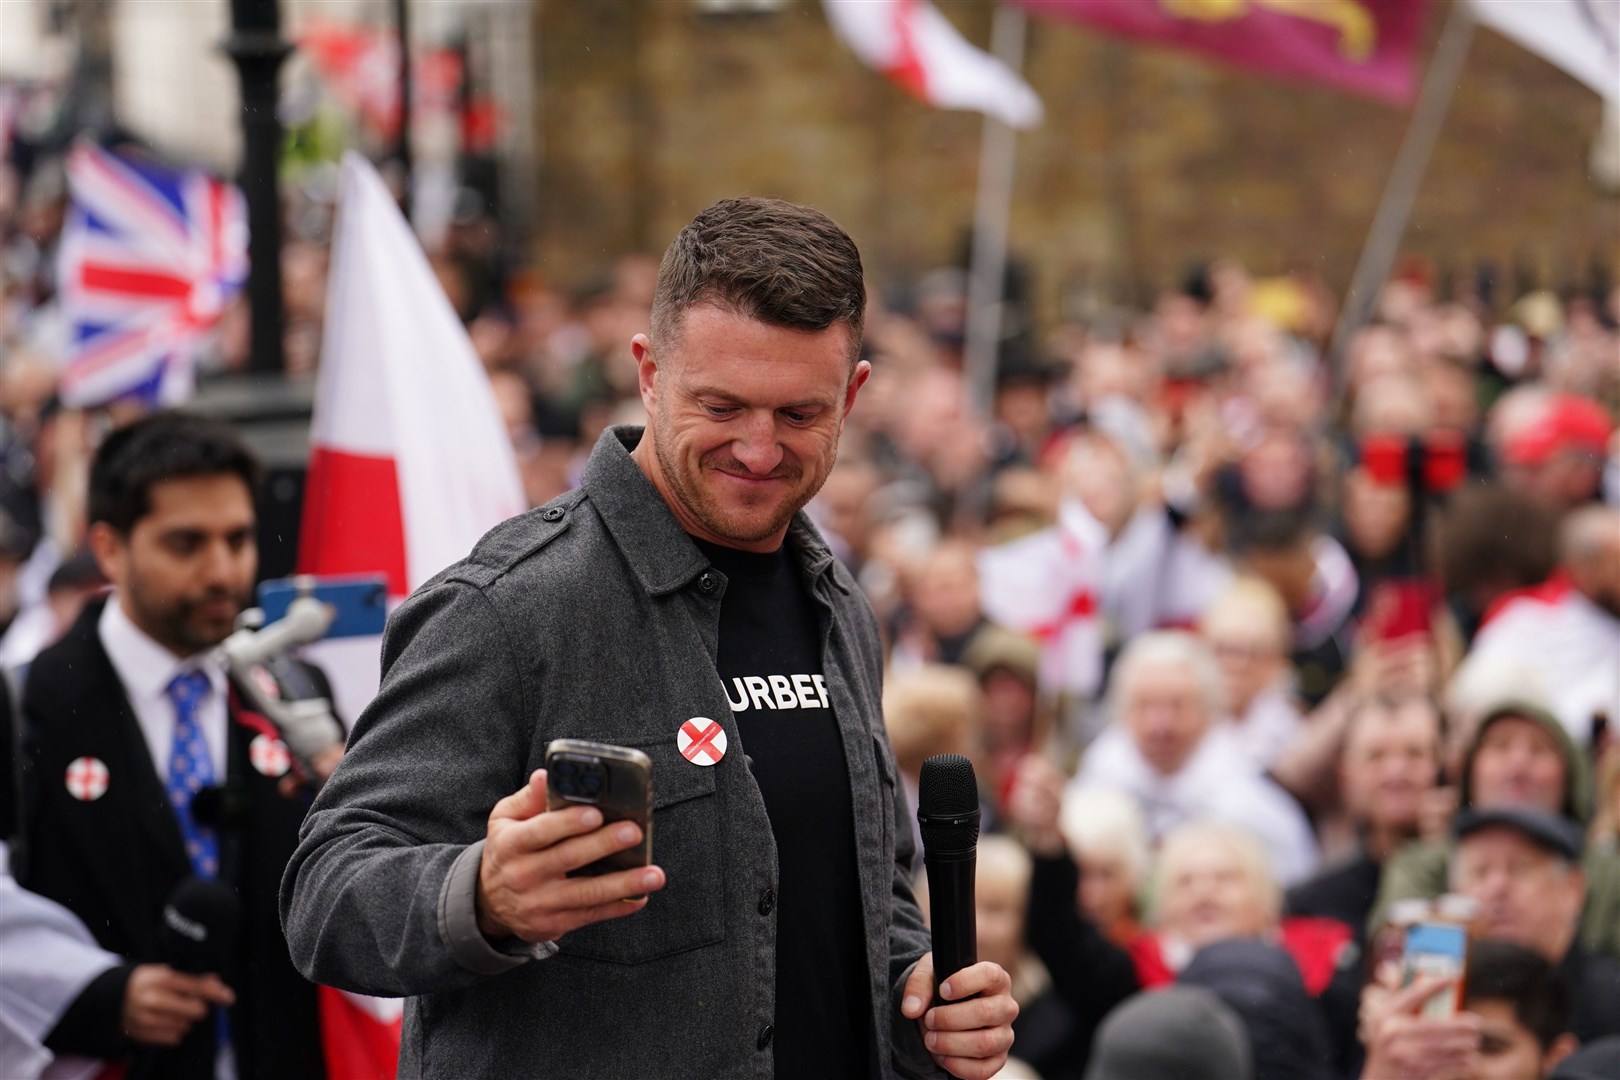 Tommy Robinson attending a St George’s Day event on Whitehall, in Westminster (Jordan Pettit/PA)